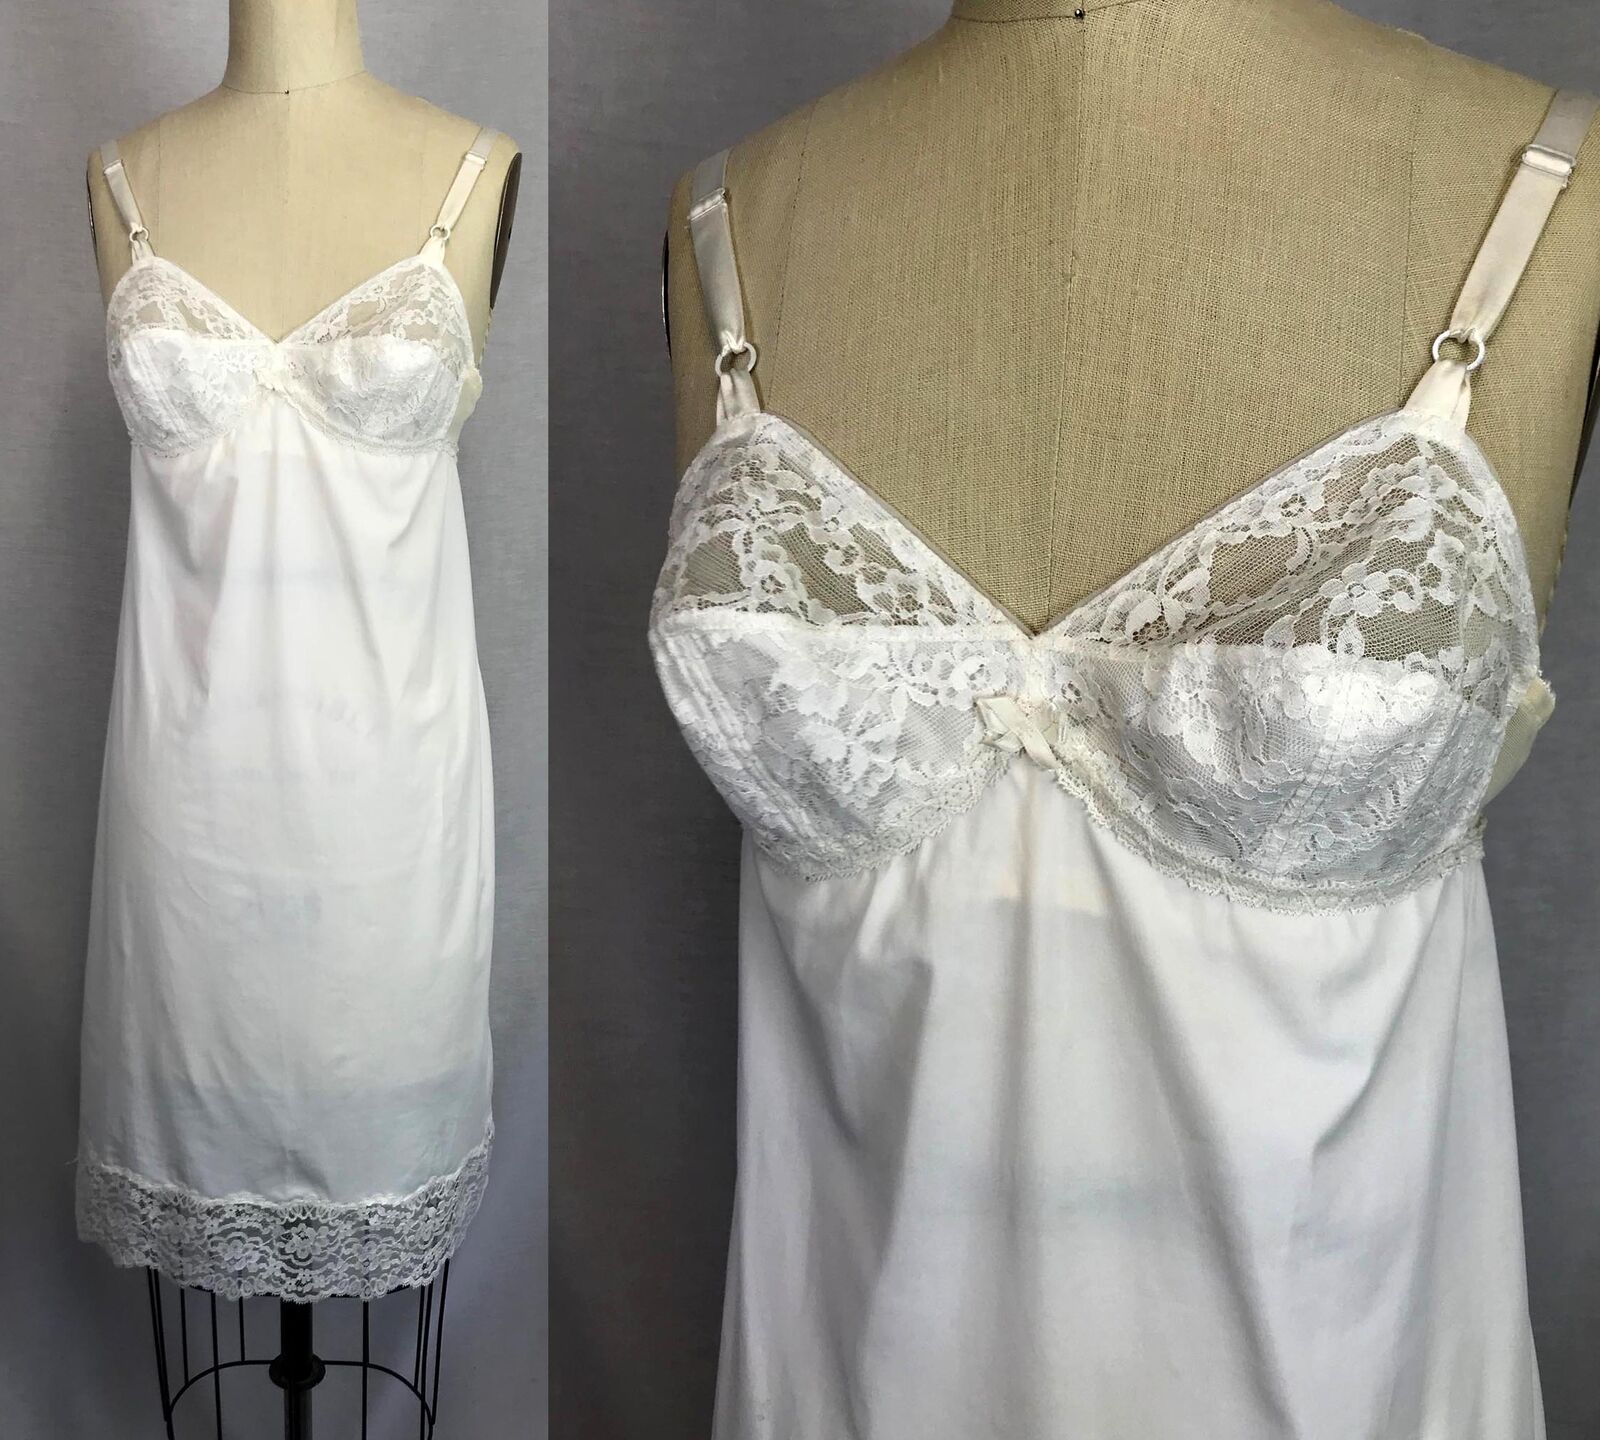 Vintage 60s White Lace Bullet Bra with Embroidered Flower by